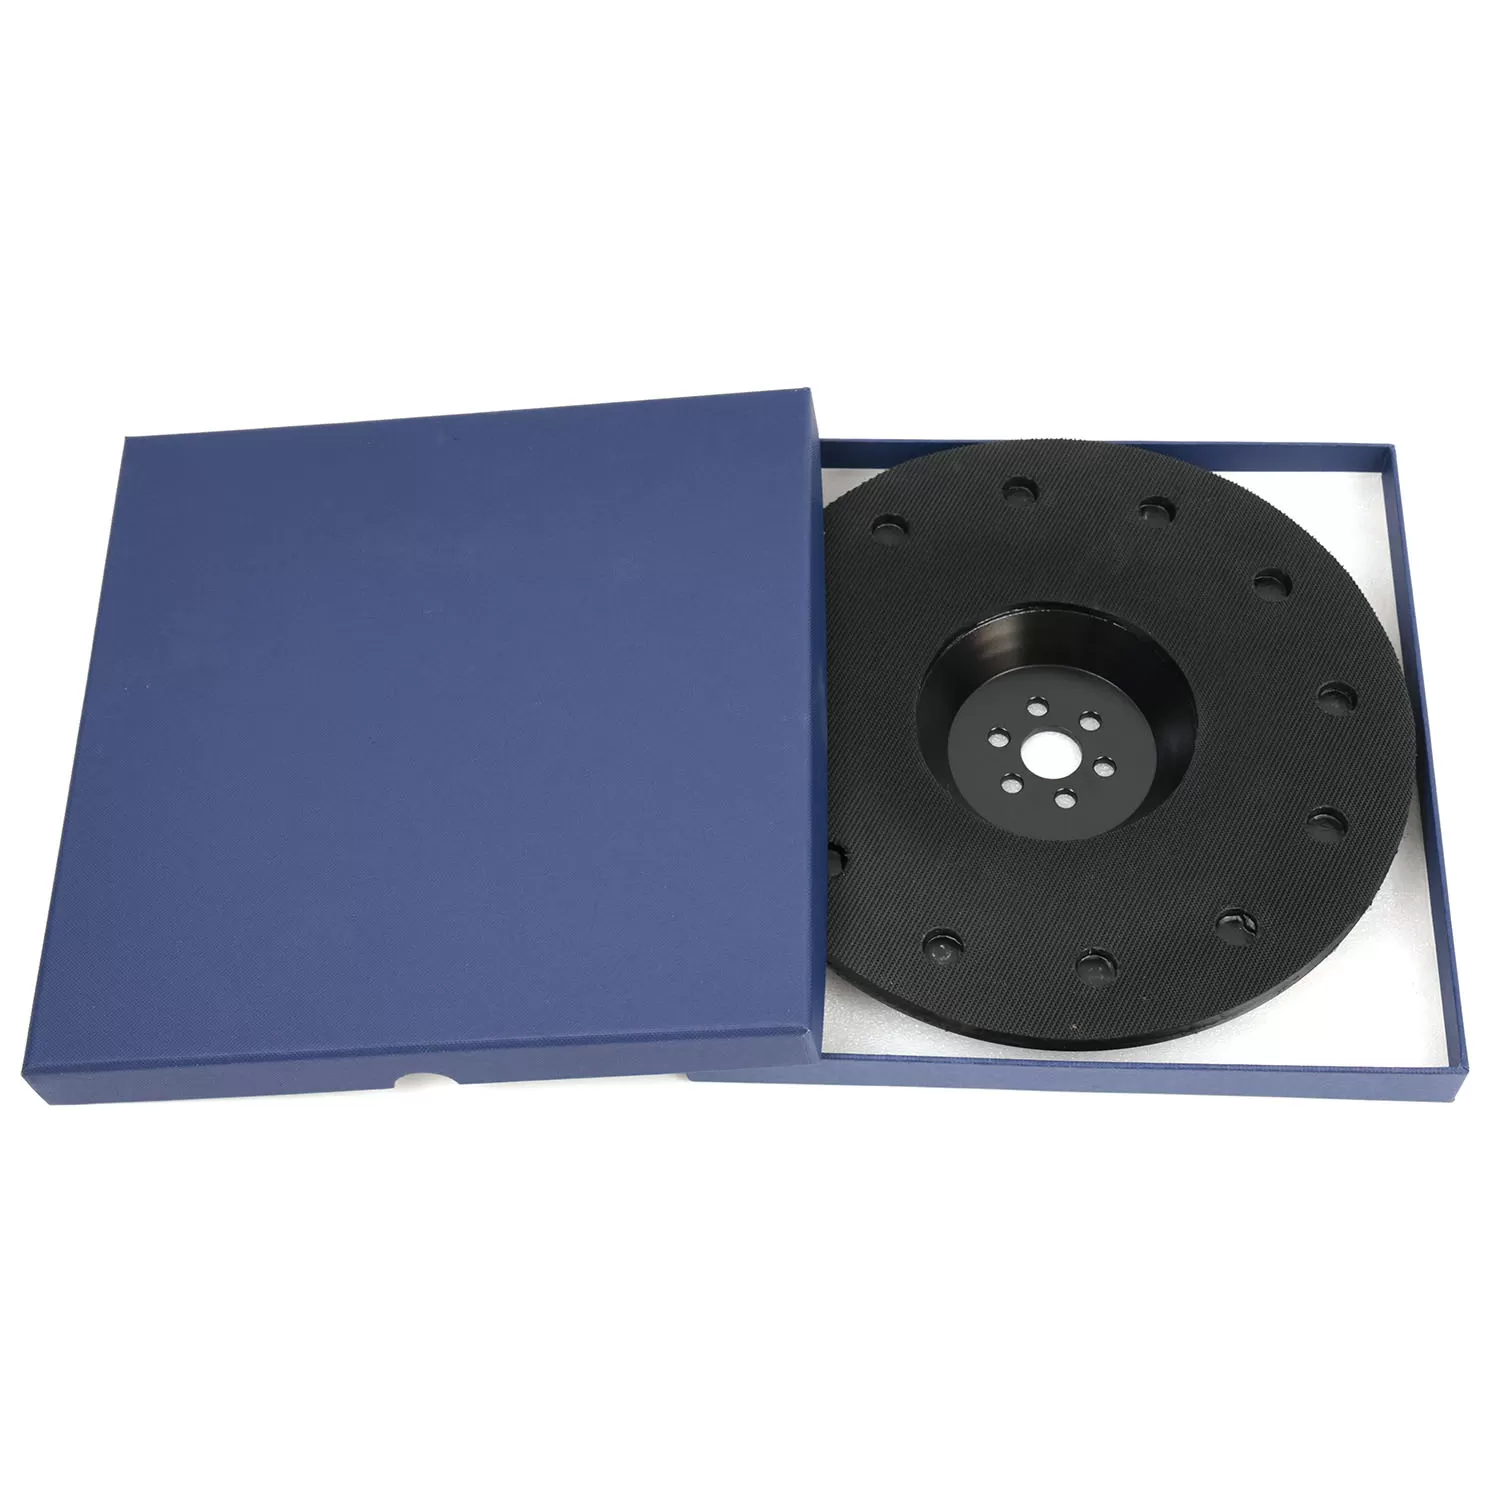 250mm Adapter Plate for disc